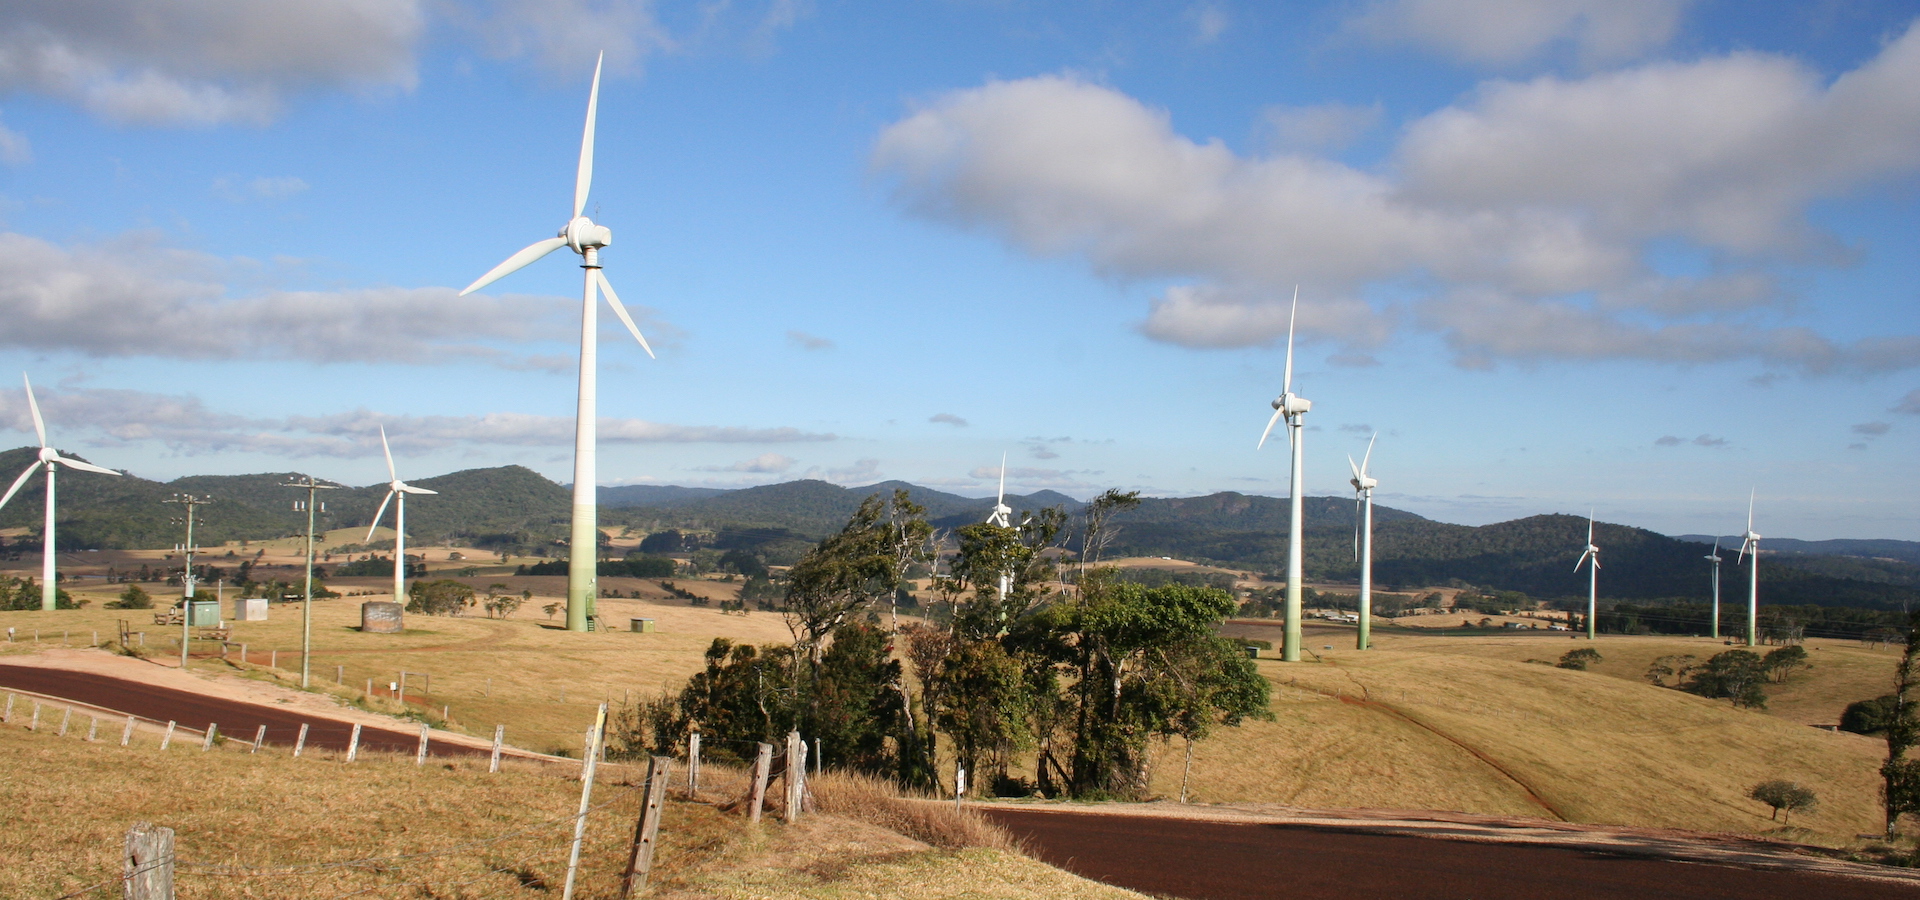 wind farm in Australia with mountains in the background